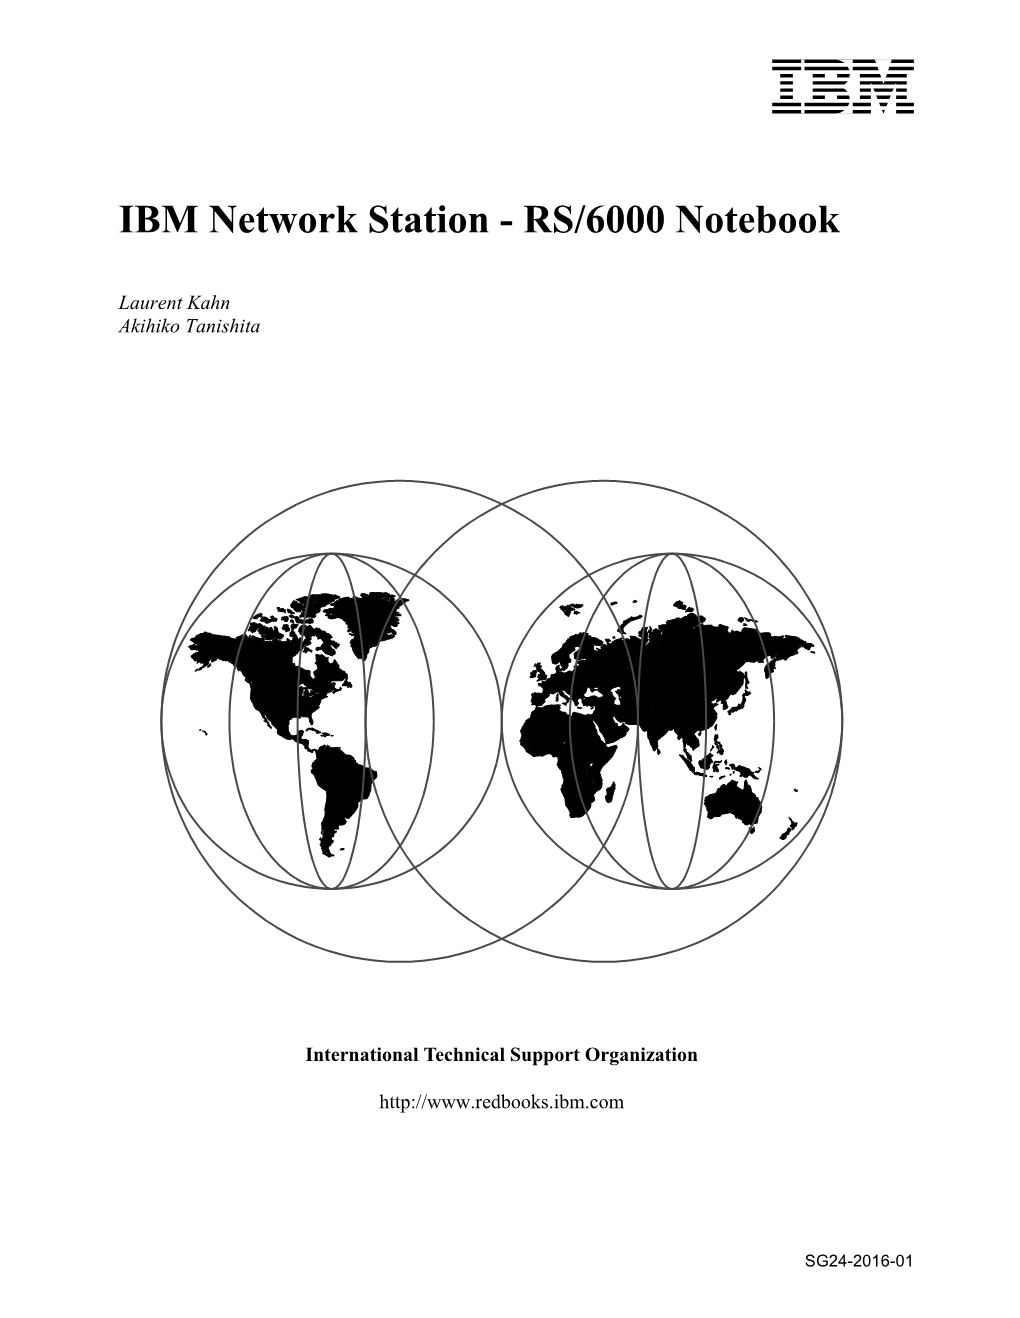 IBM Network Station - RS/6000 Notebook